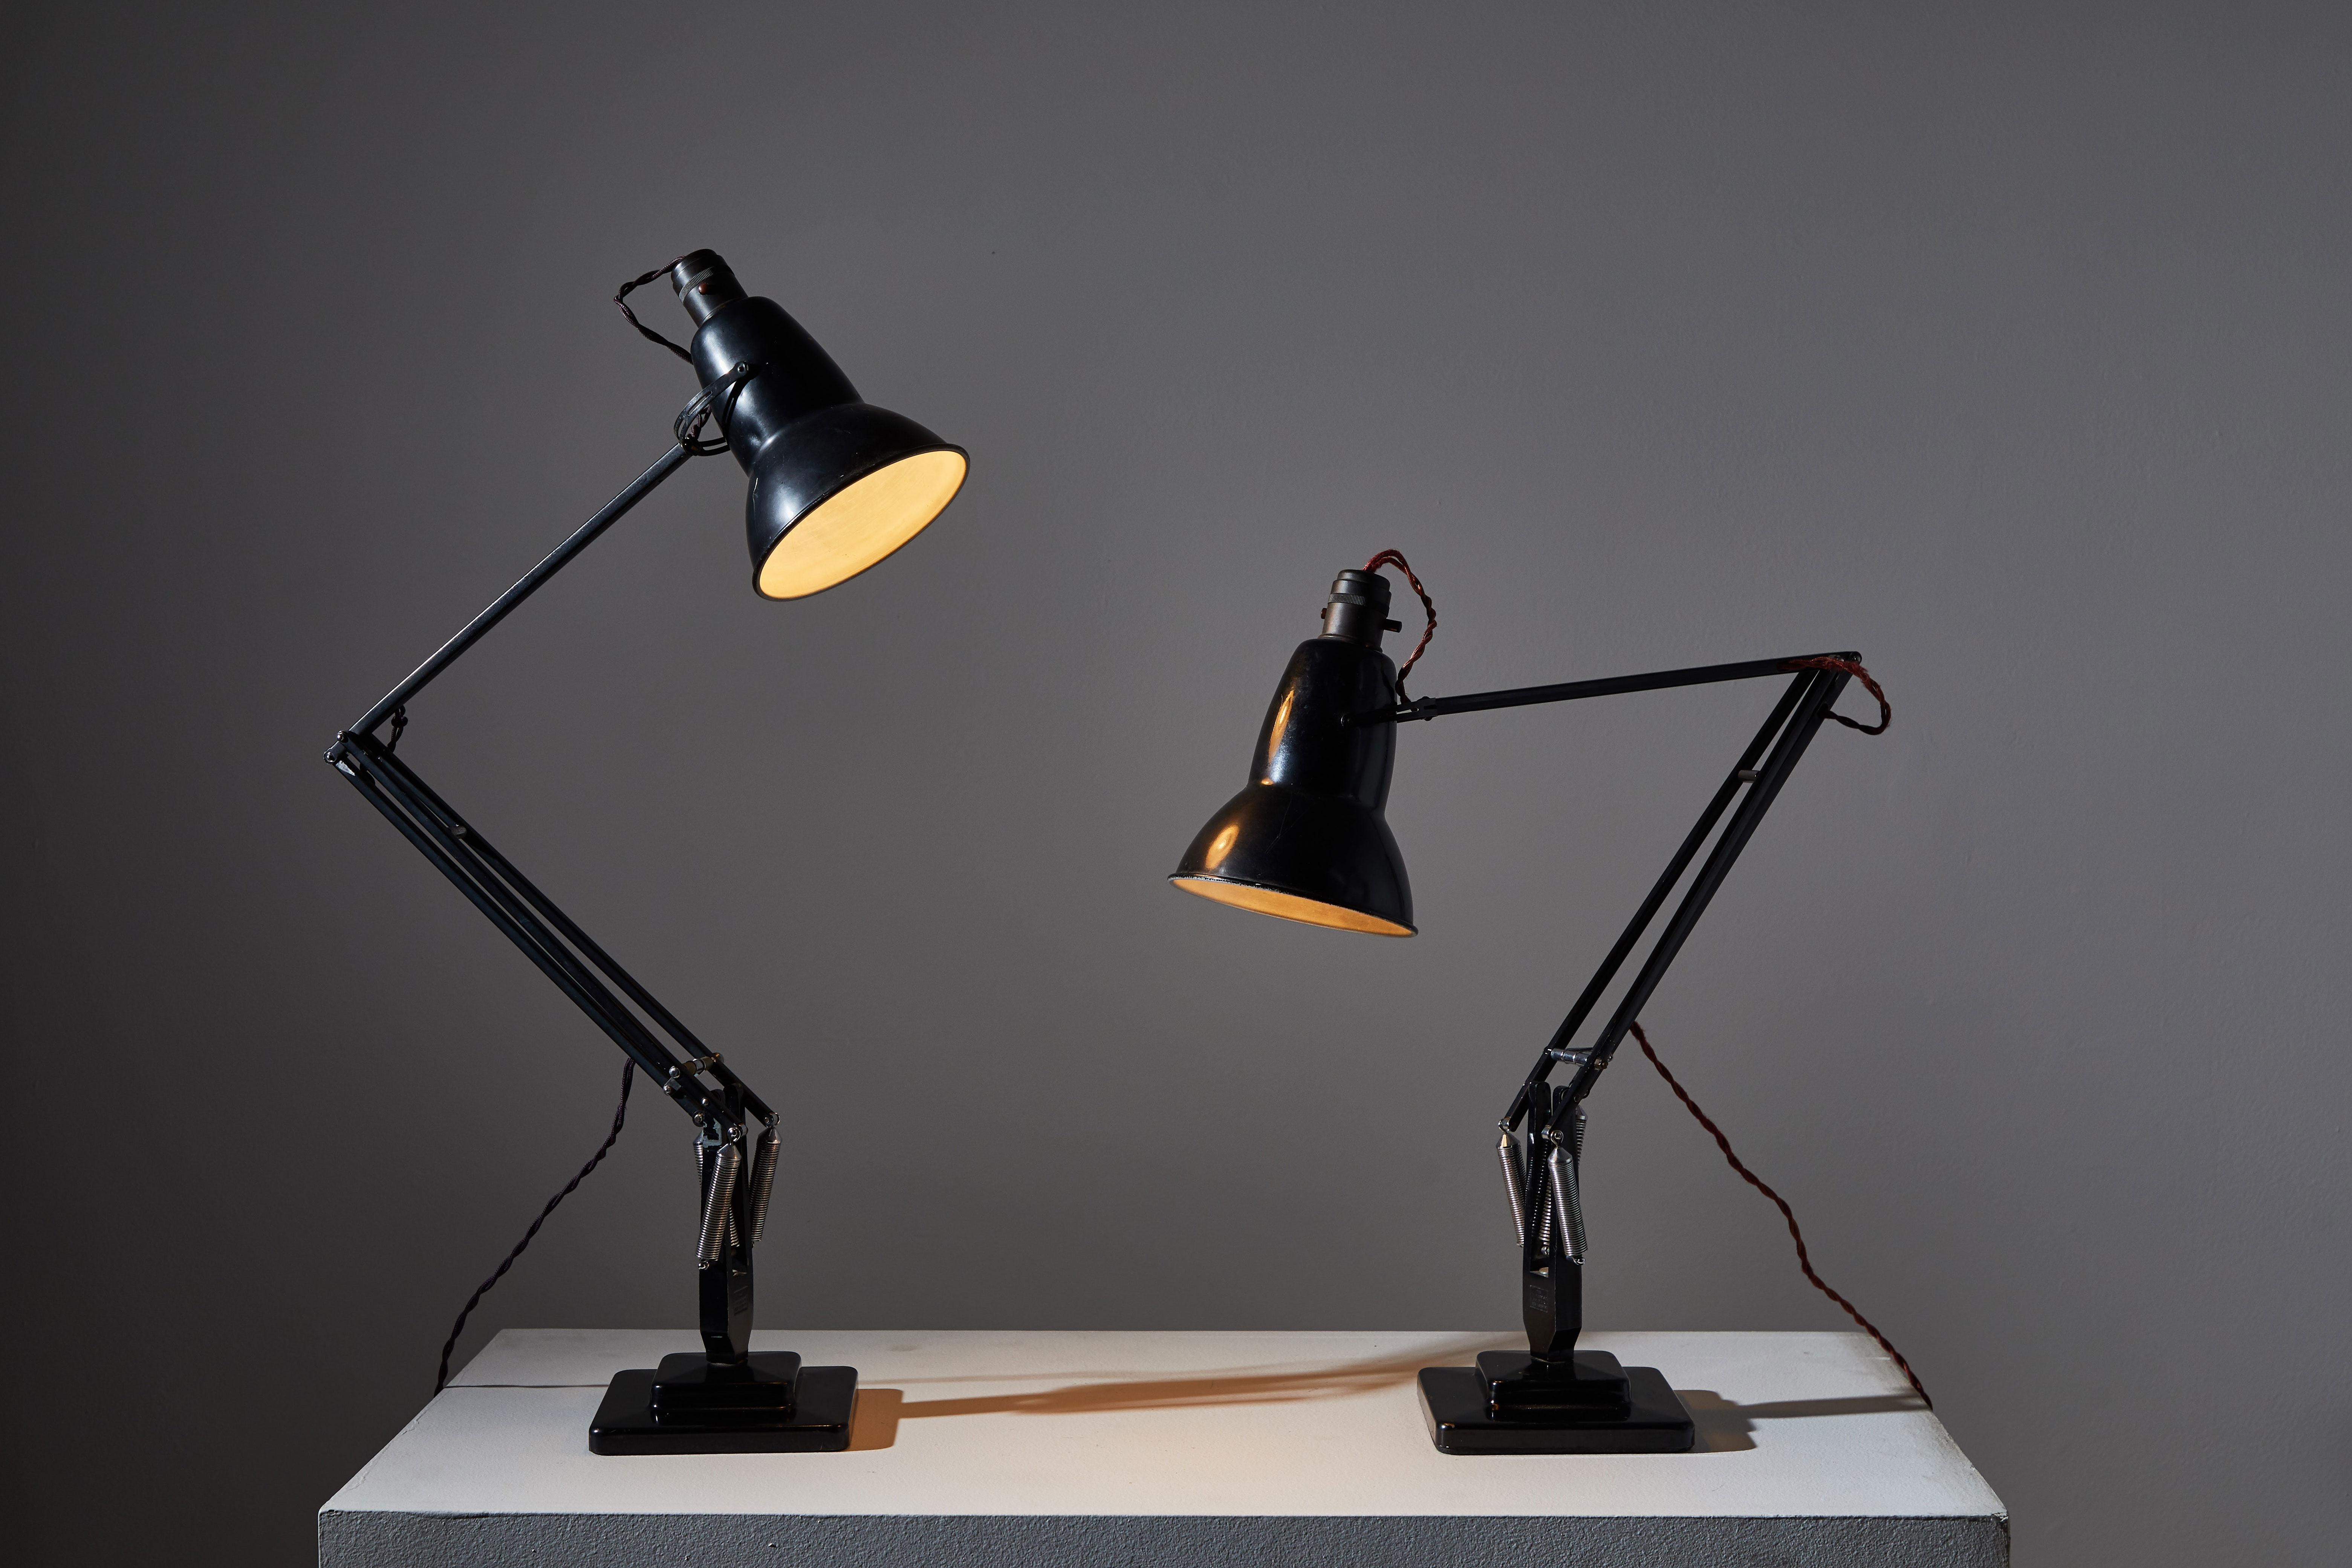 Two model 1227 table lamps by George Carwardine for Anglepoise. Designed and manufactured in the United Kingdom early 1920s. Enameled metal and iron. Original cord and bakelite sockets. Maintains original manufacturer's patent stamp. Shade